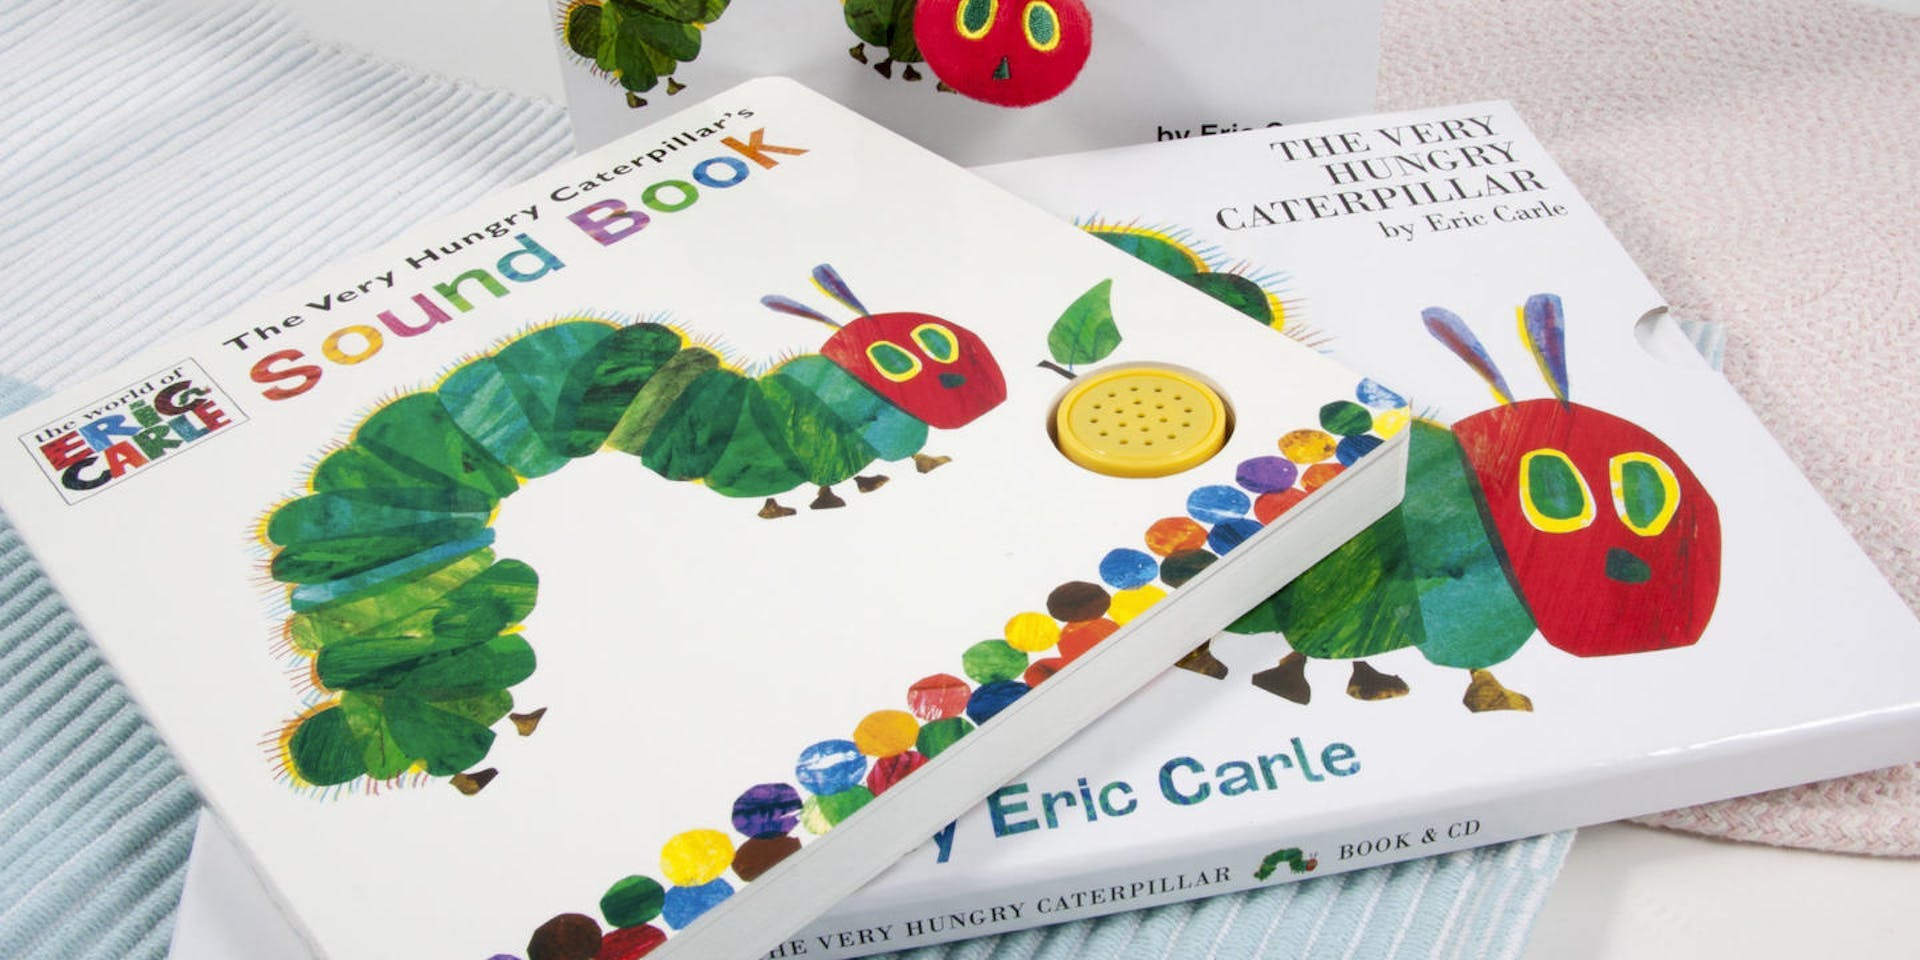 Play and Grow with The Very Hungry Caterpillar